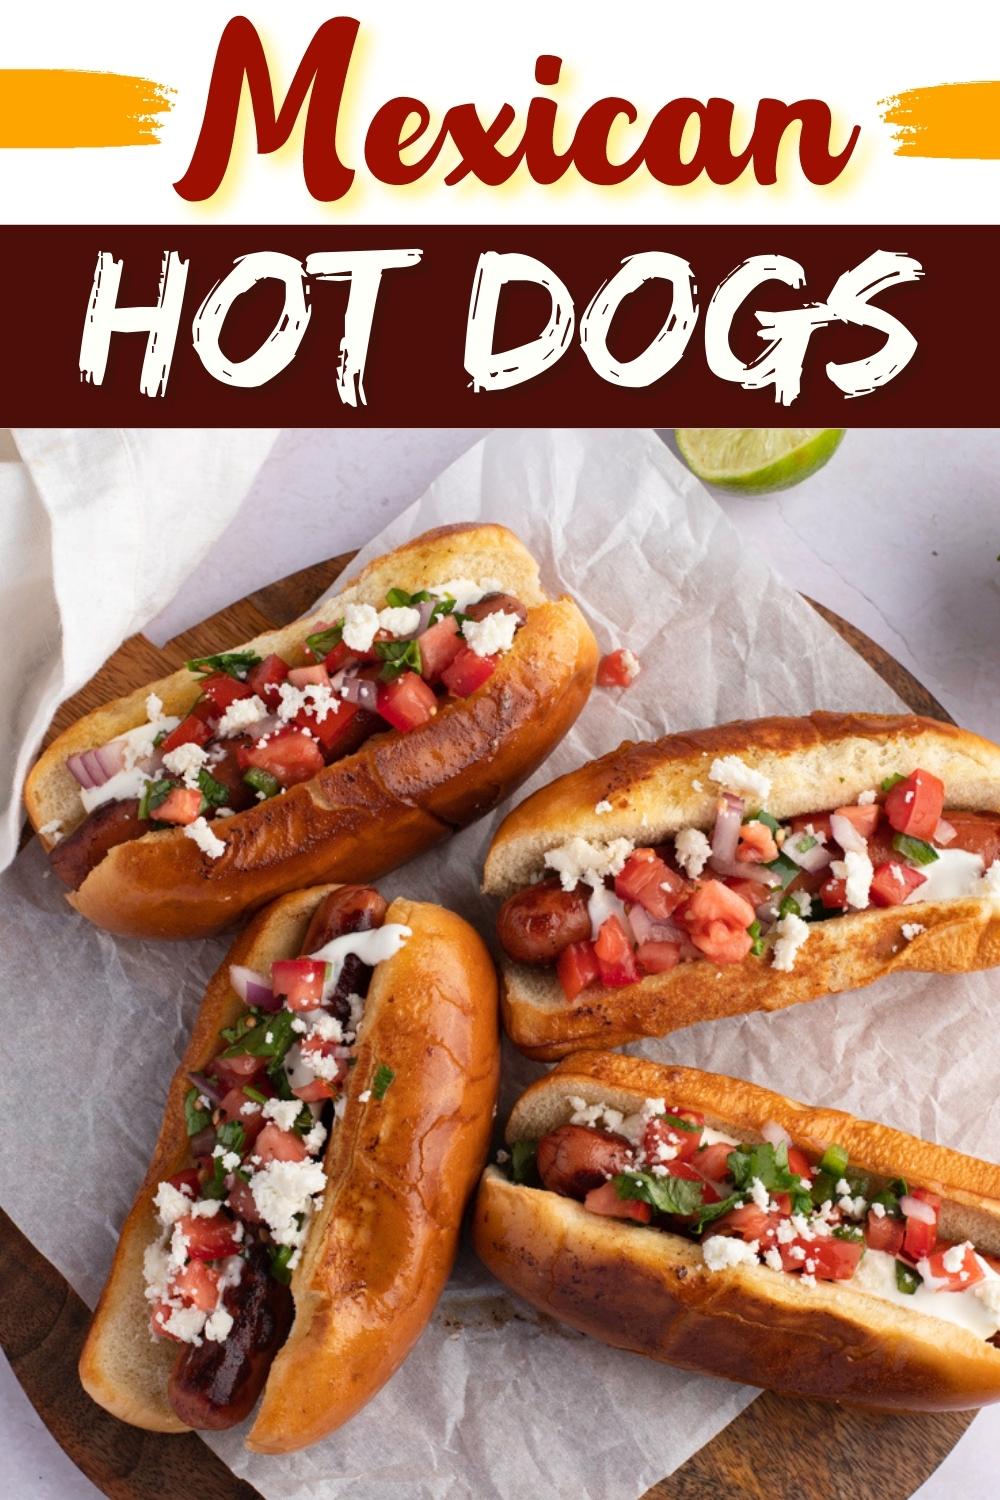 Beginner's Guide to Mexican Food, Part VII: Mexican Hotdog Recipe